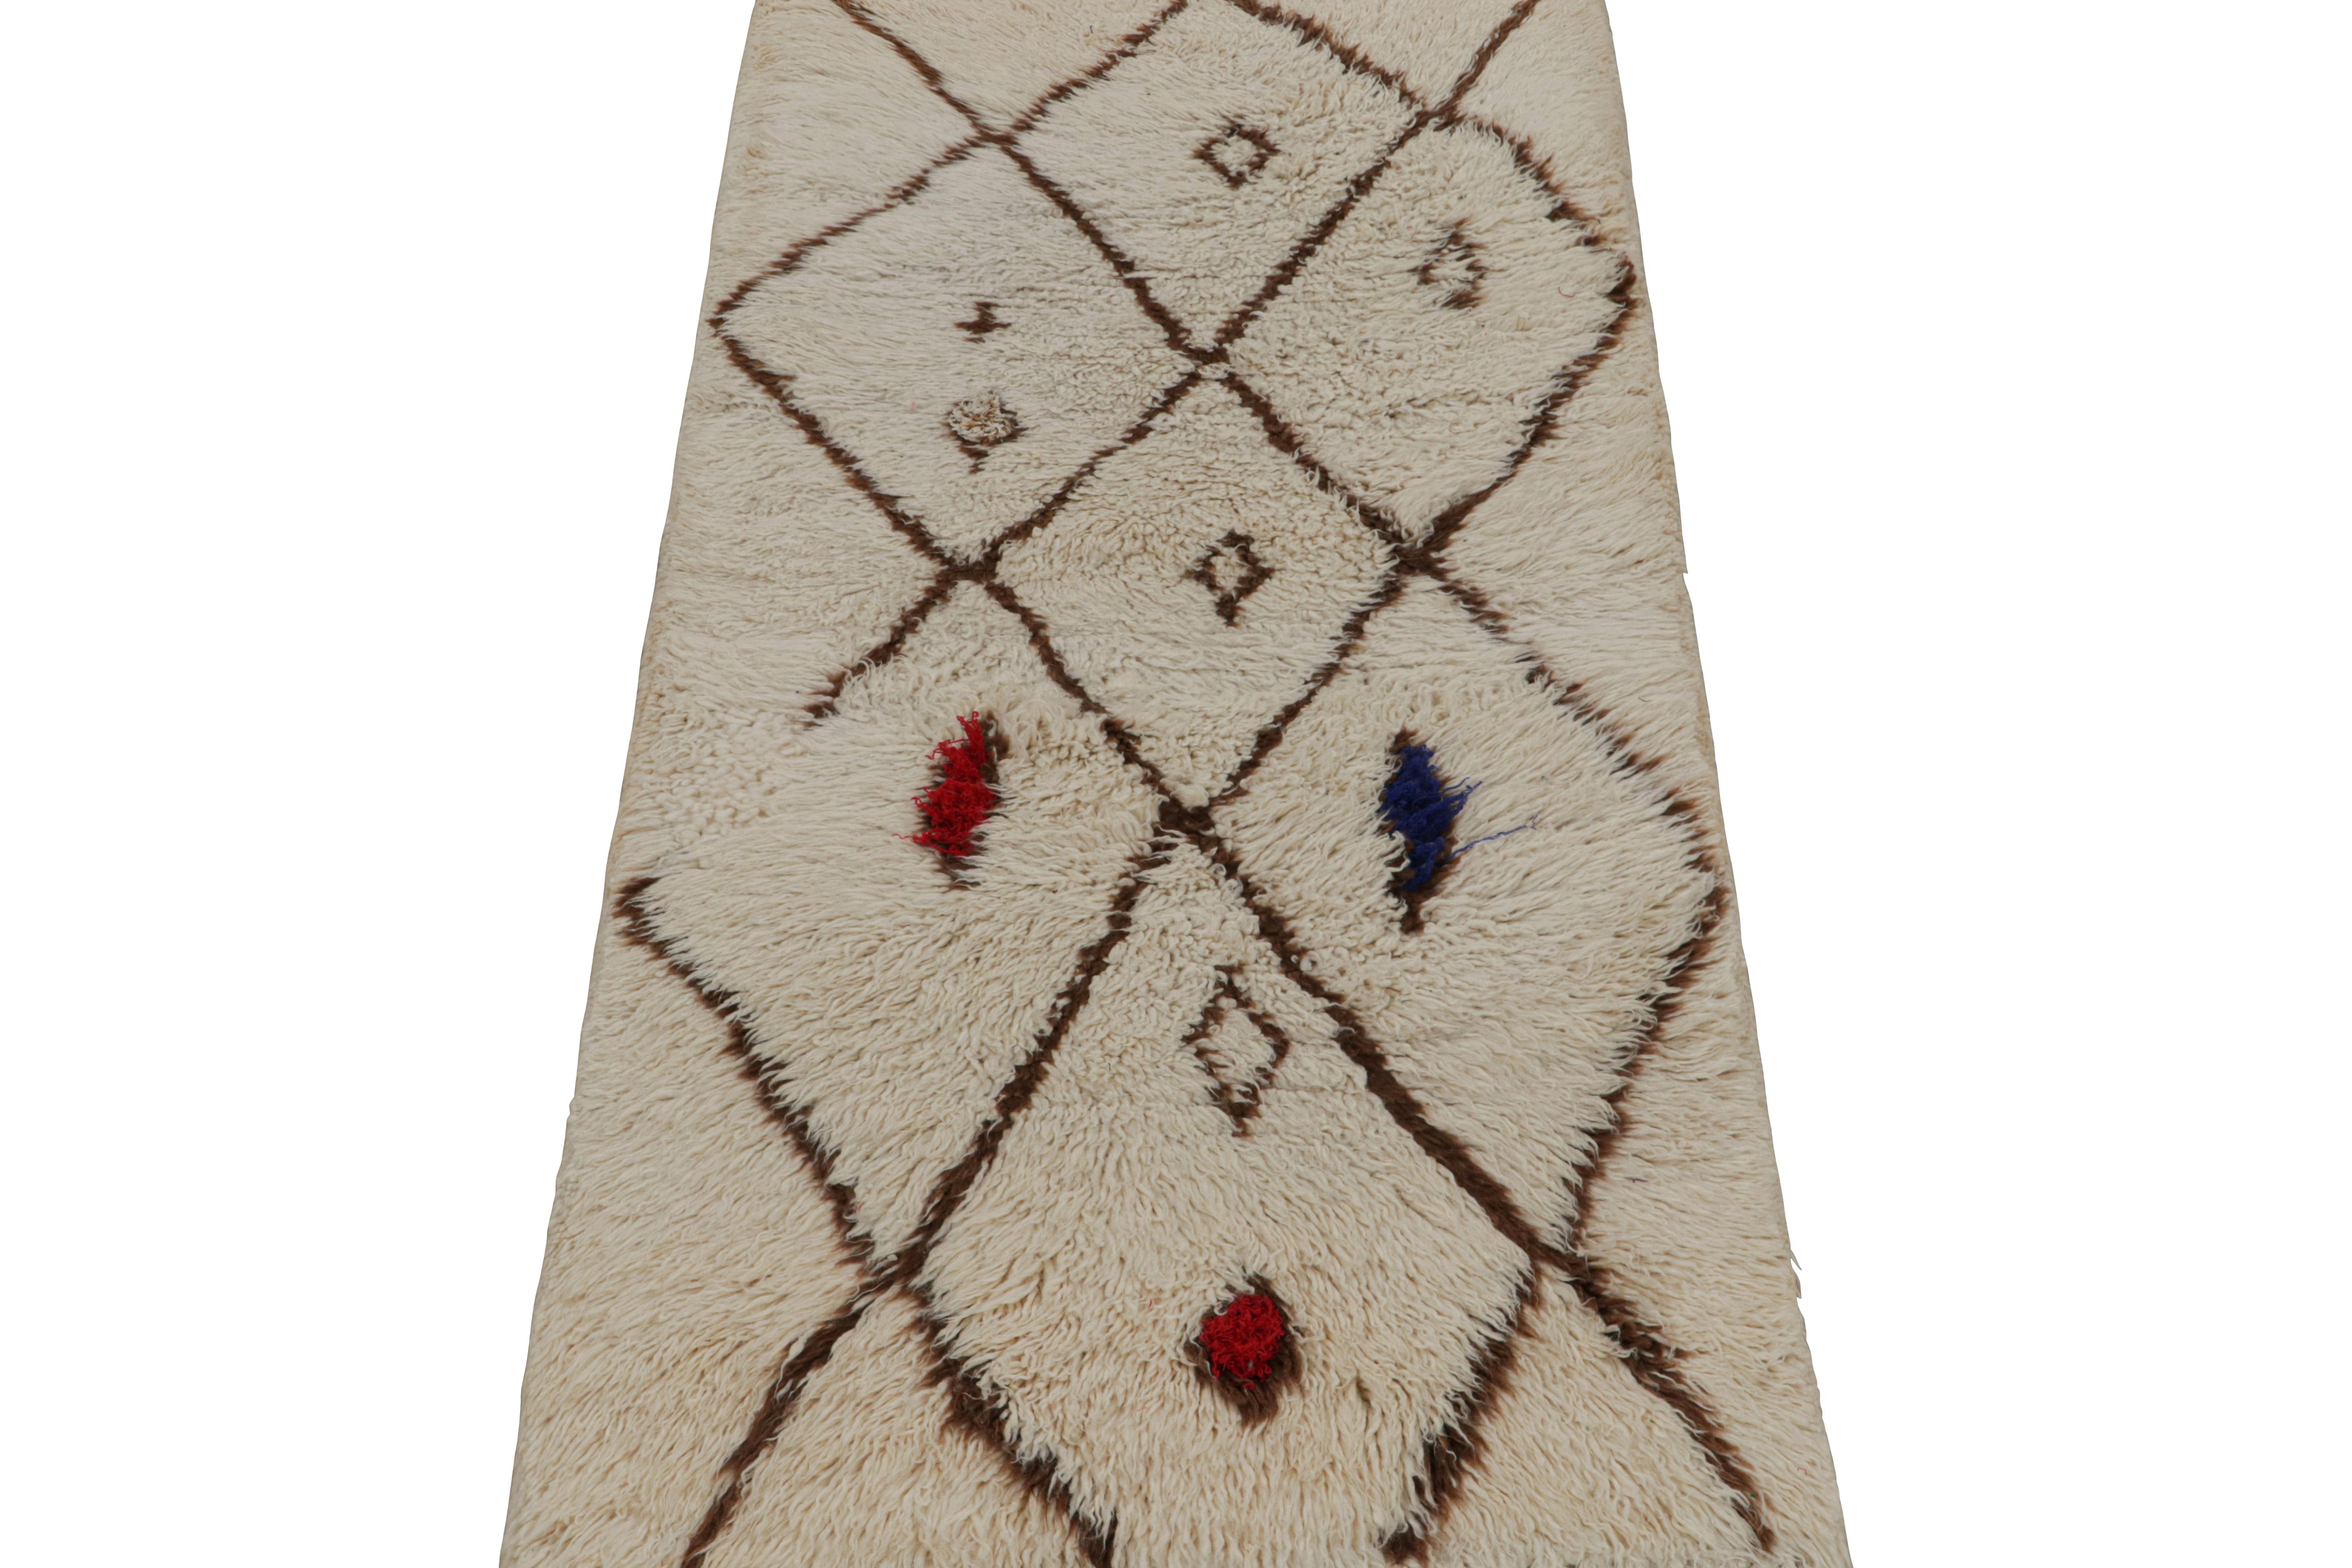 Tribal 1950s Azilal Moroccan runner rug with Beige-Brown Patterns by Rug & Kilim For Sale